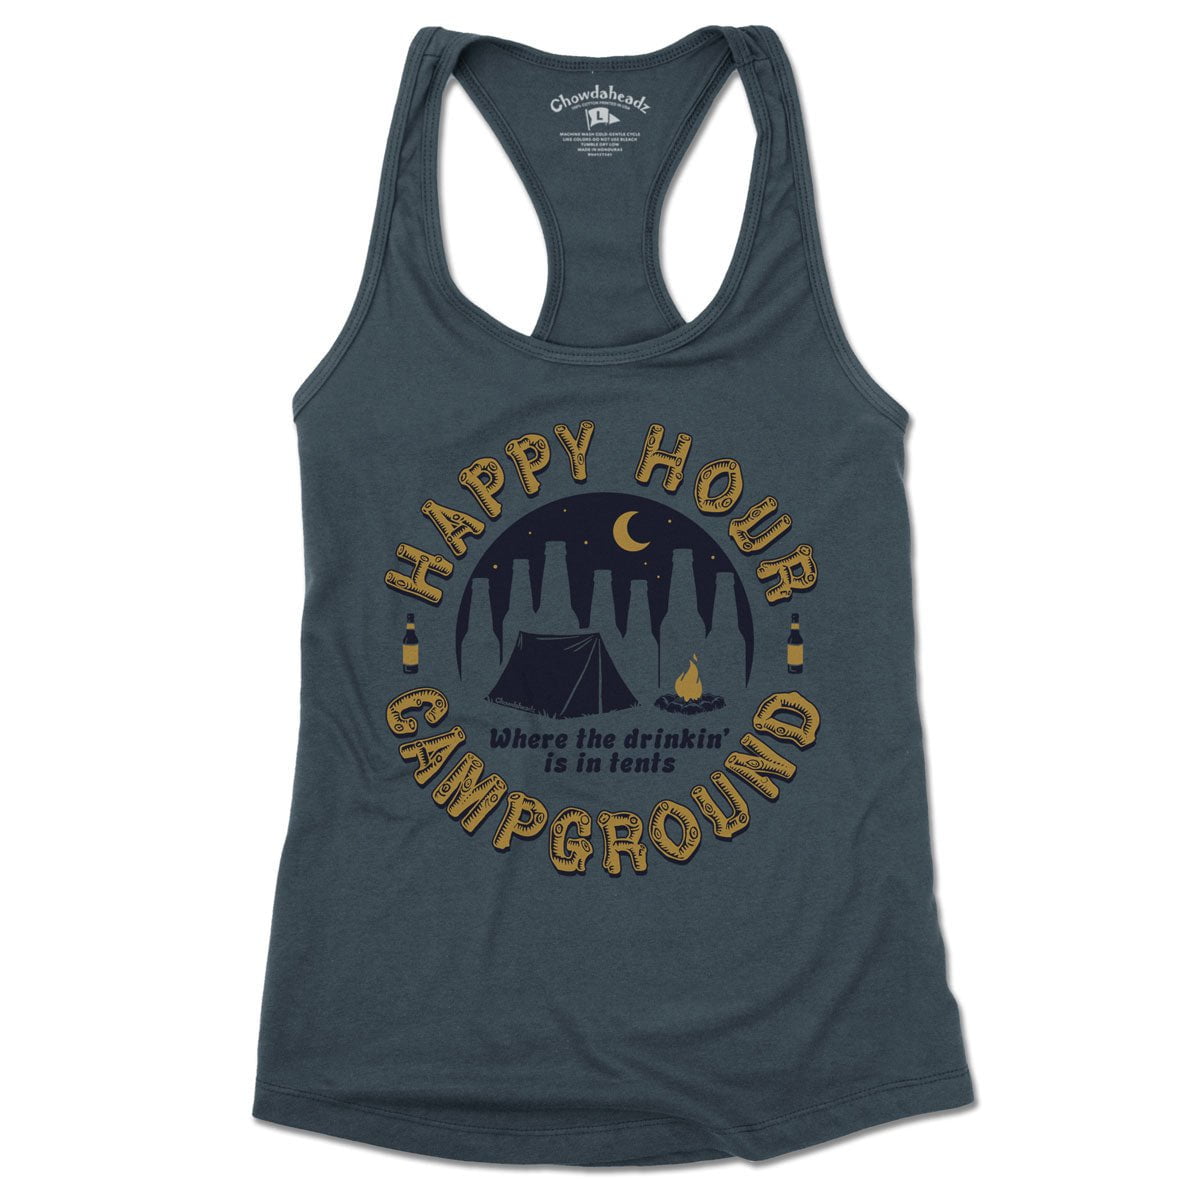 Happy Hour Campground Women's Tank Top (3 Colors) - Chowdaheadz